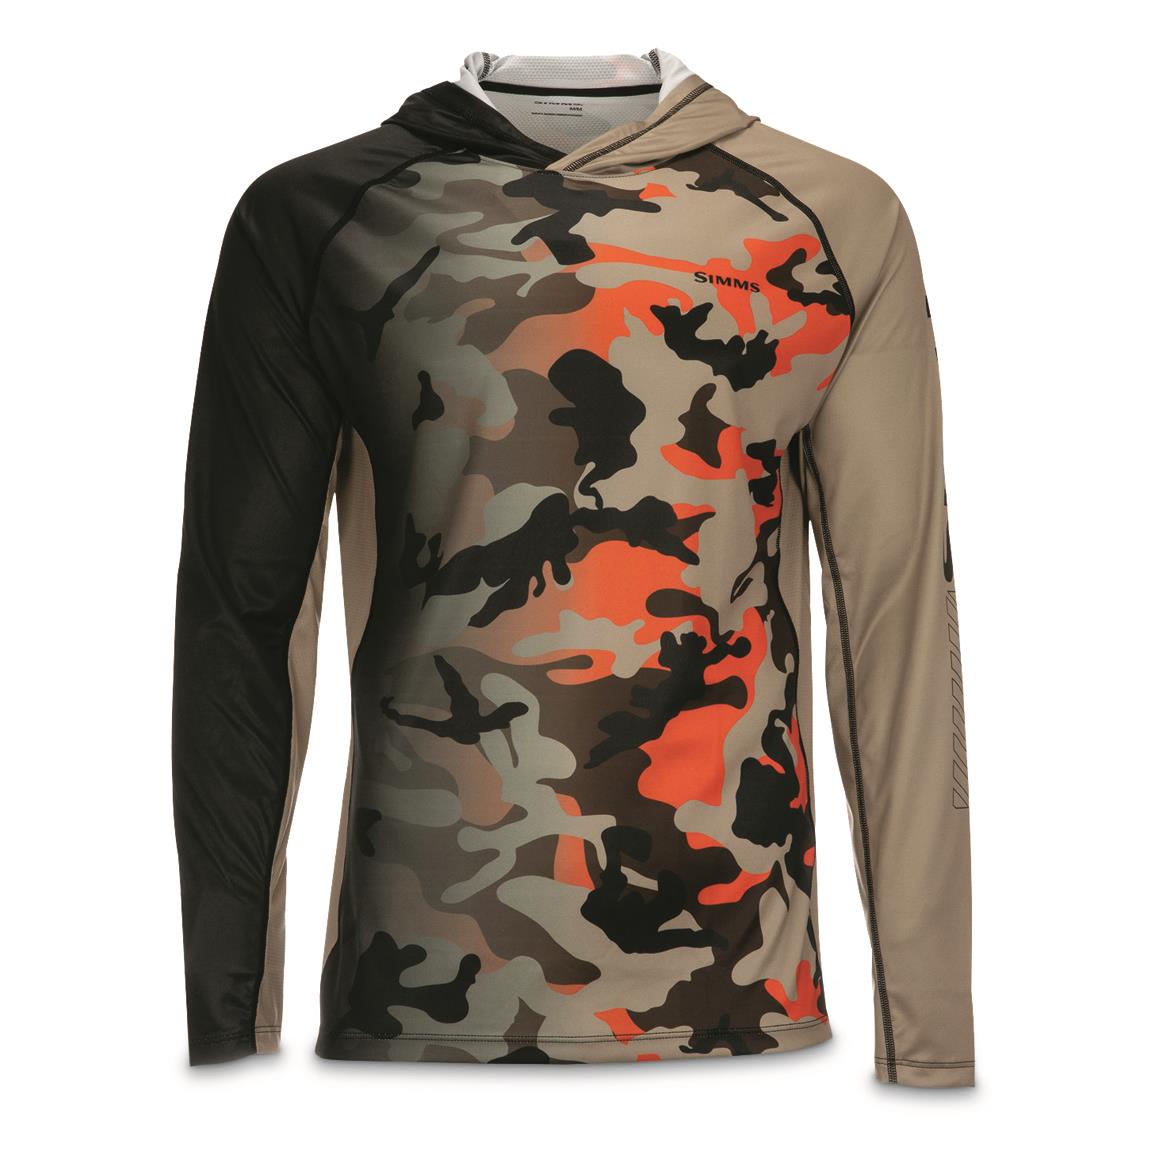 Simms Men's SolarVent Hoodie Pro, Woodland Camo Flame